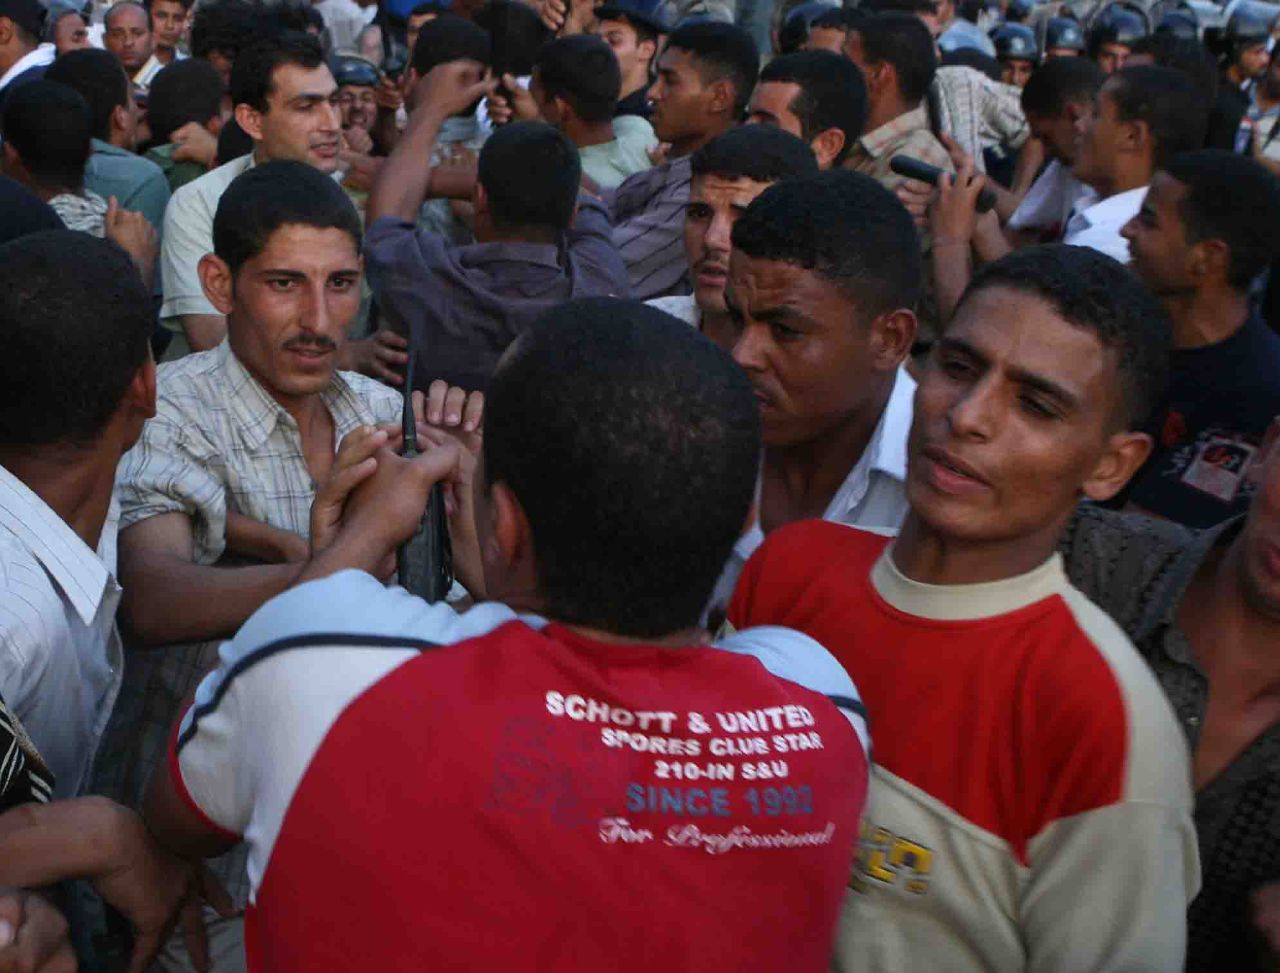 Plainclothes police thugs barring demonstrators from marching in Tahrir Square (Photo by Amr Abdallah, 26 July 2006)